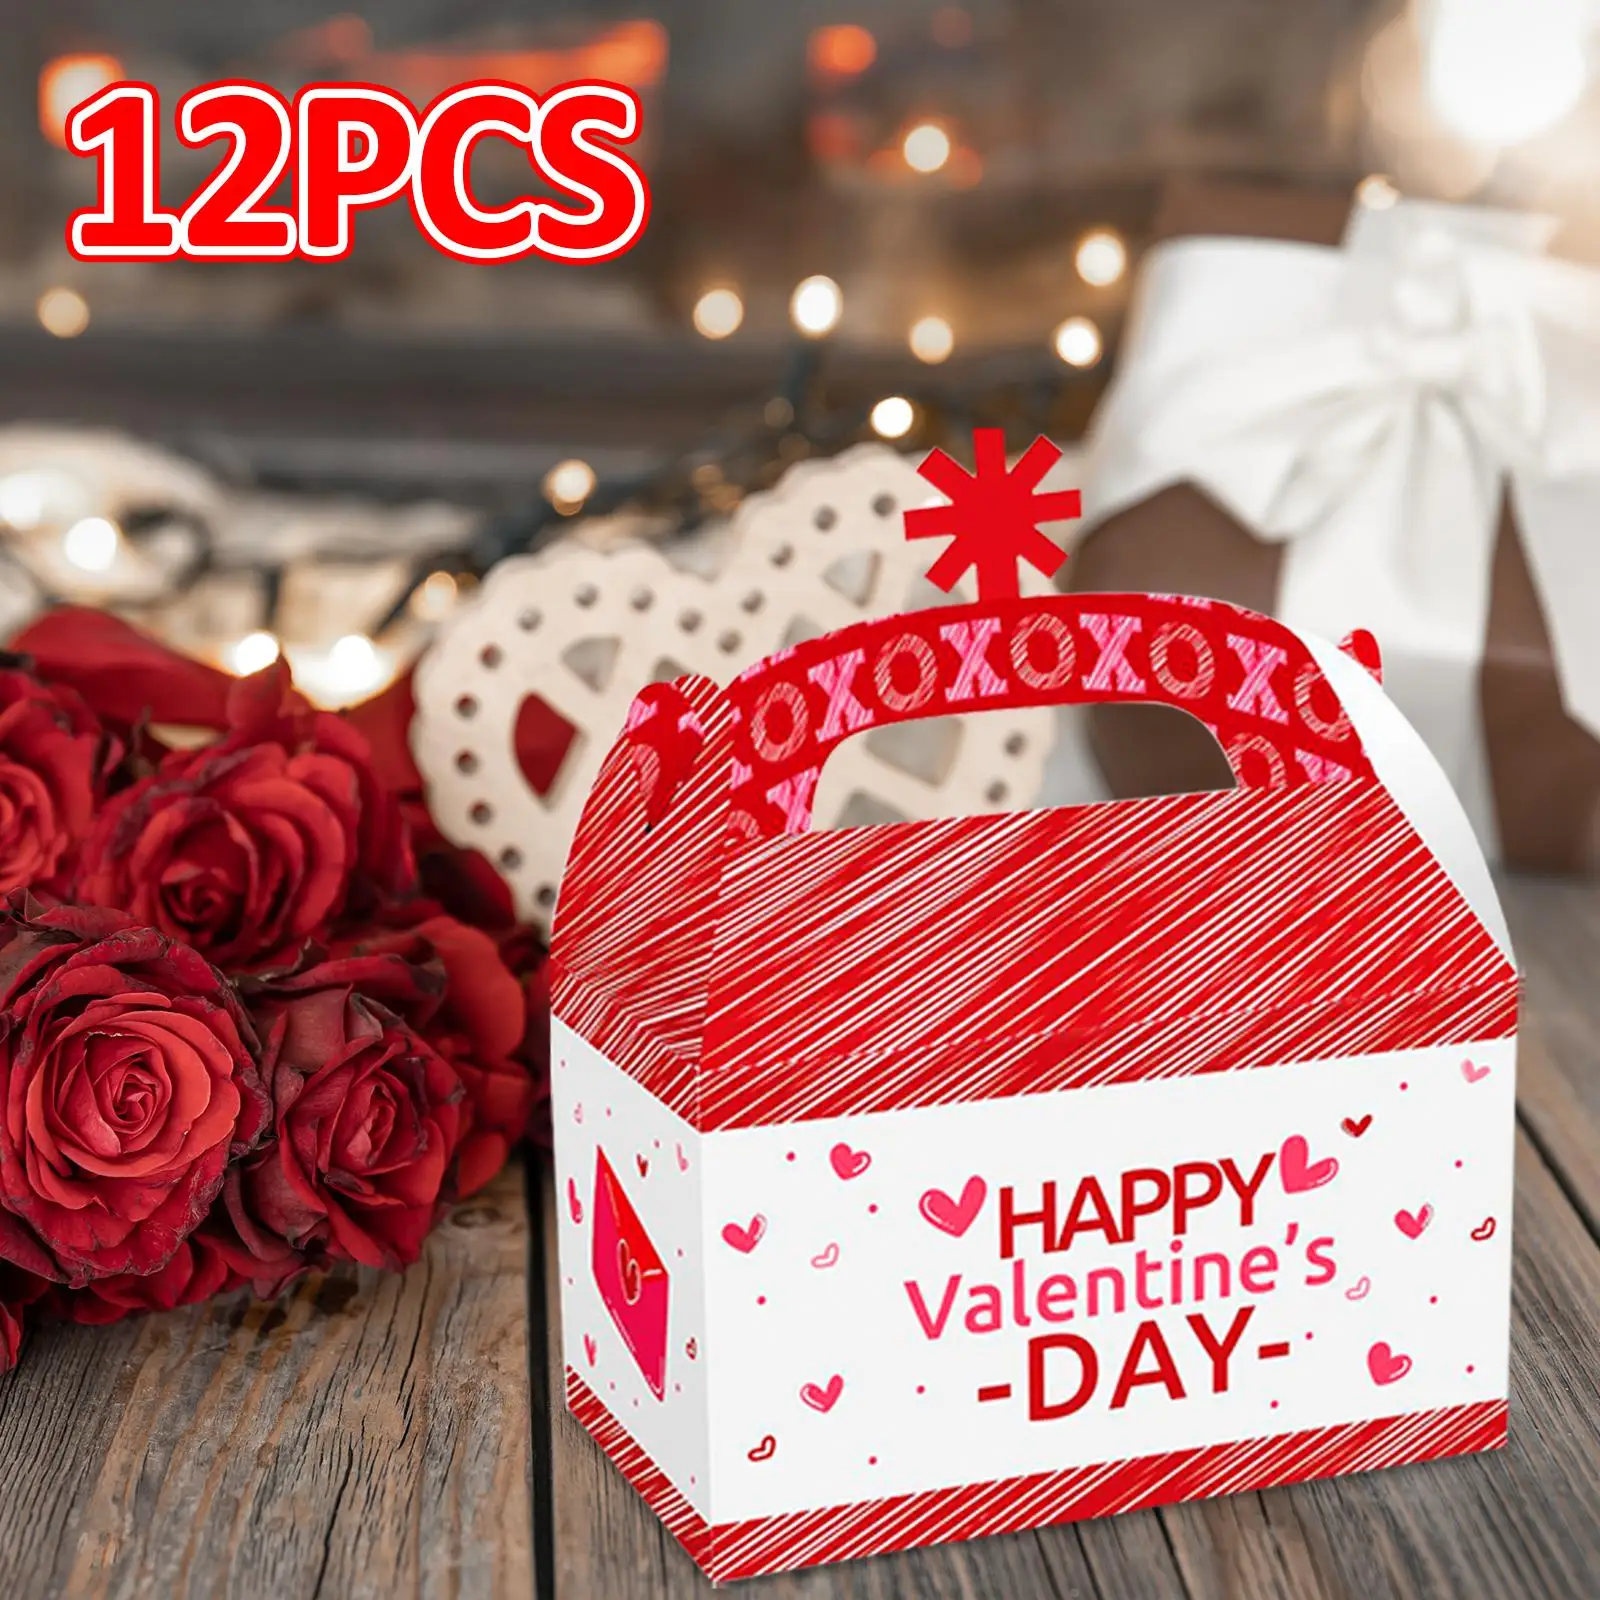 12x Valentine`s Day Treat Boxes Small Red Containers Holder Gift Boxes for Candy Sweets Snacks Dessert Valentines Party Supplies